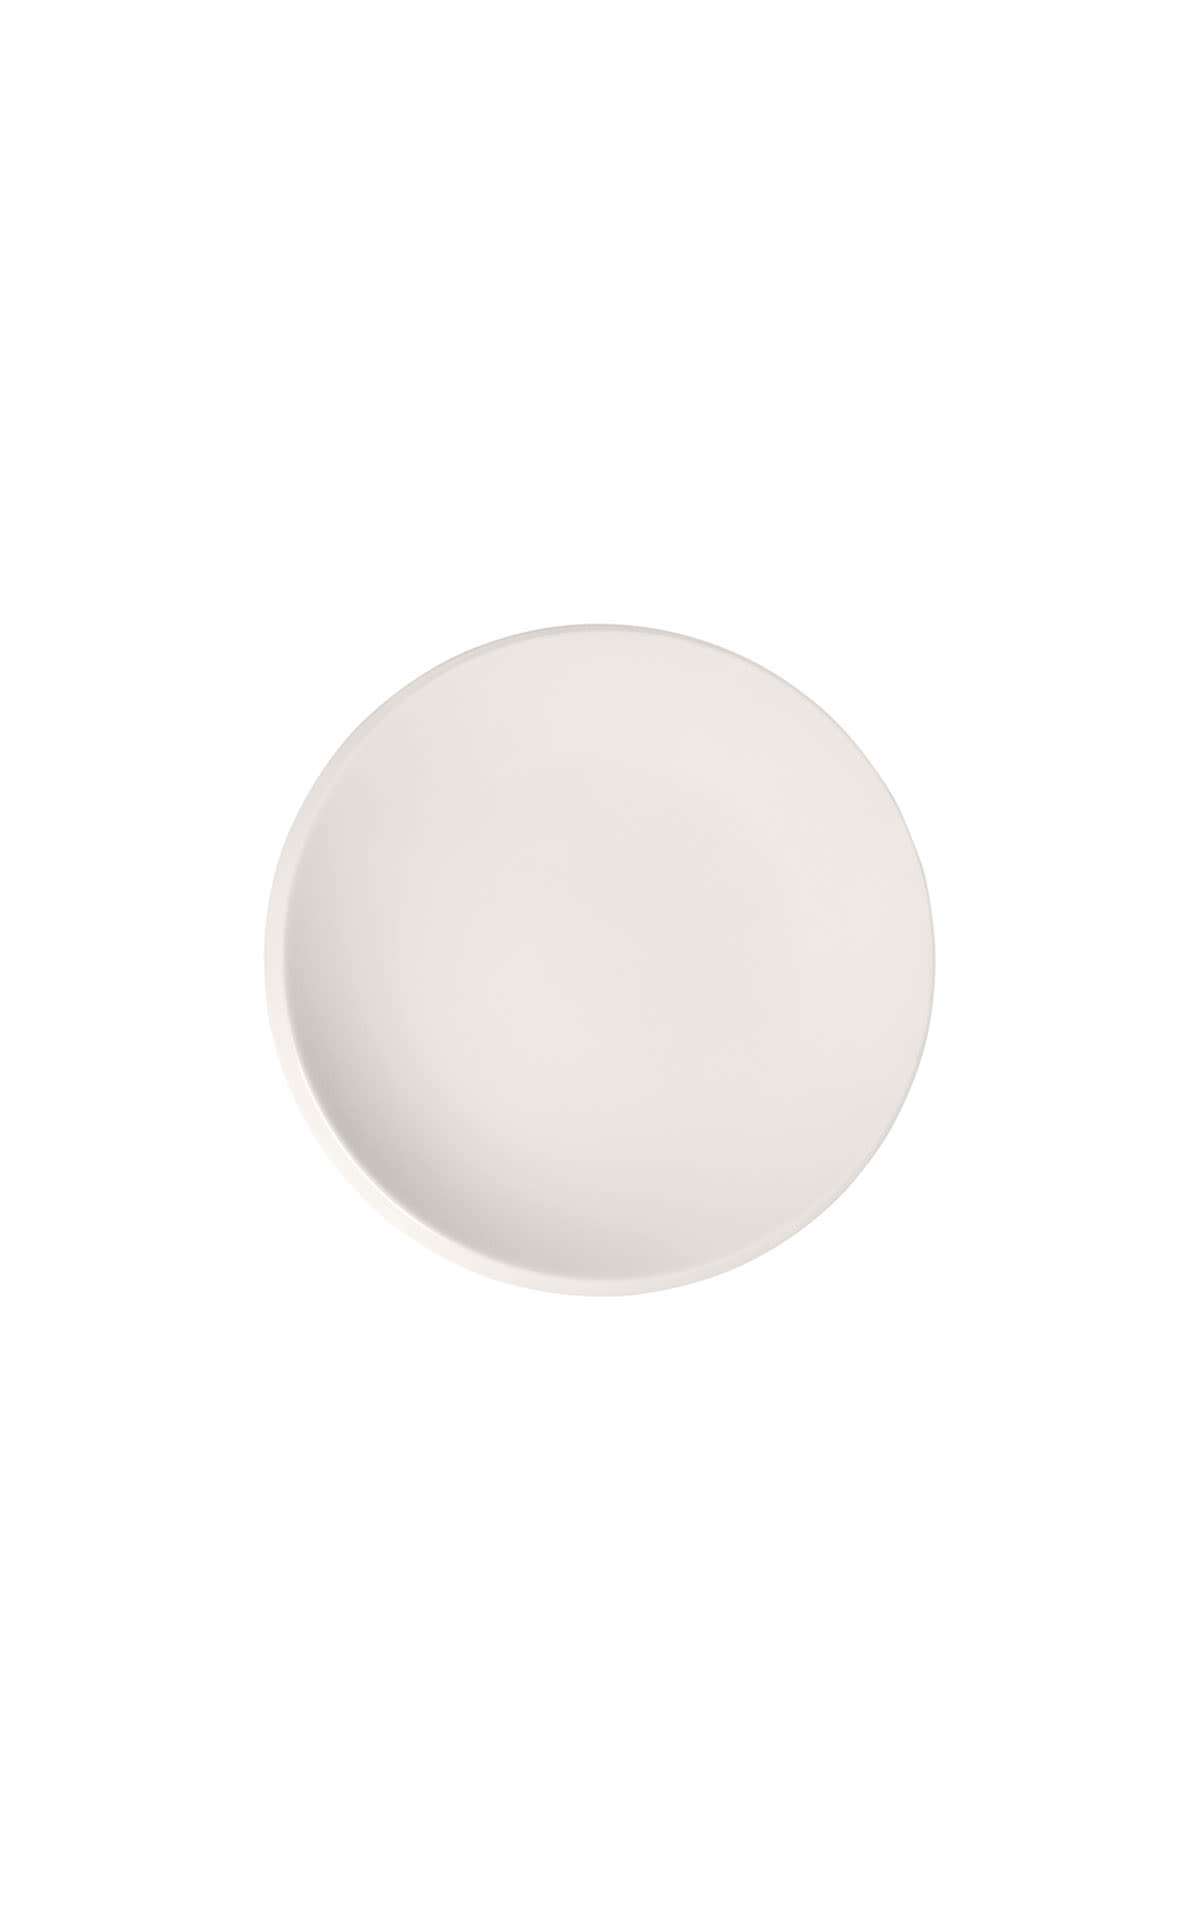 Villeroy & Boch New moon flat plate from Bicester Village